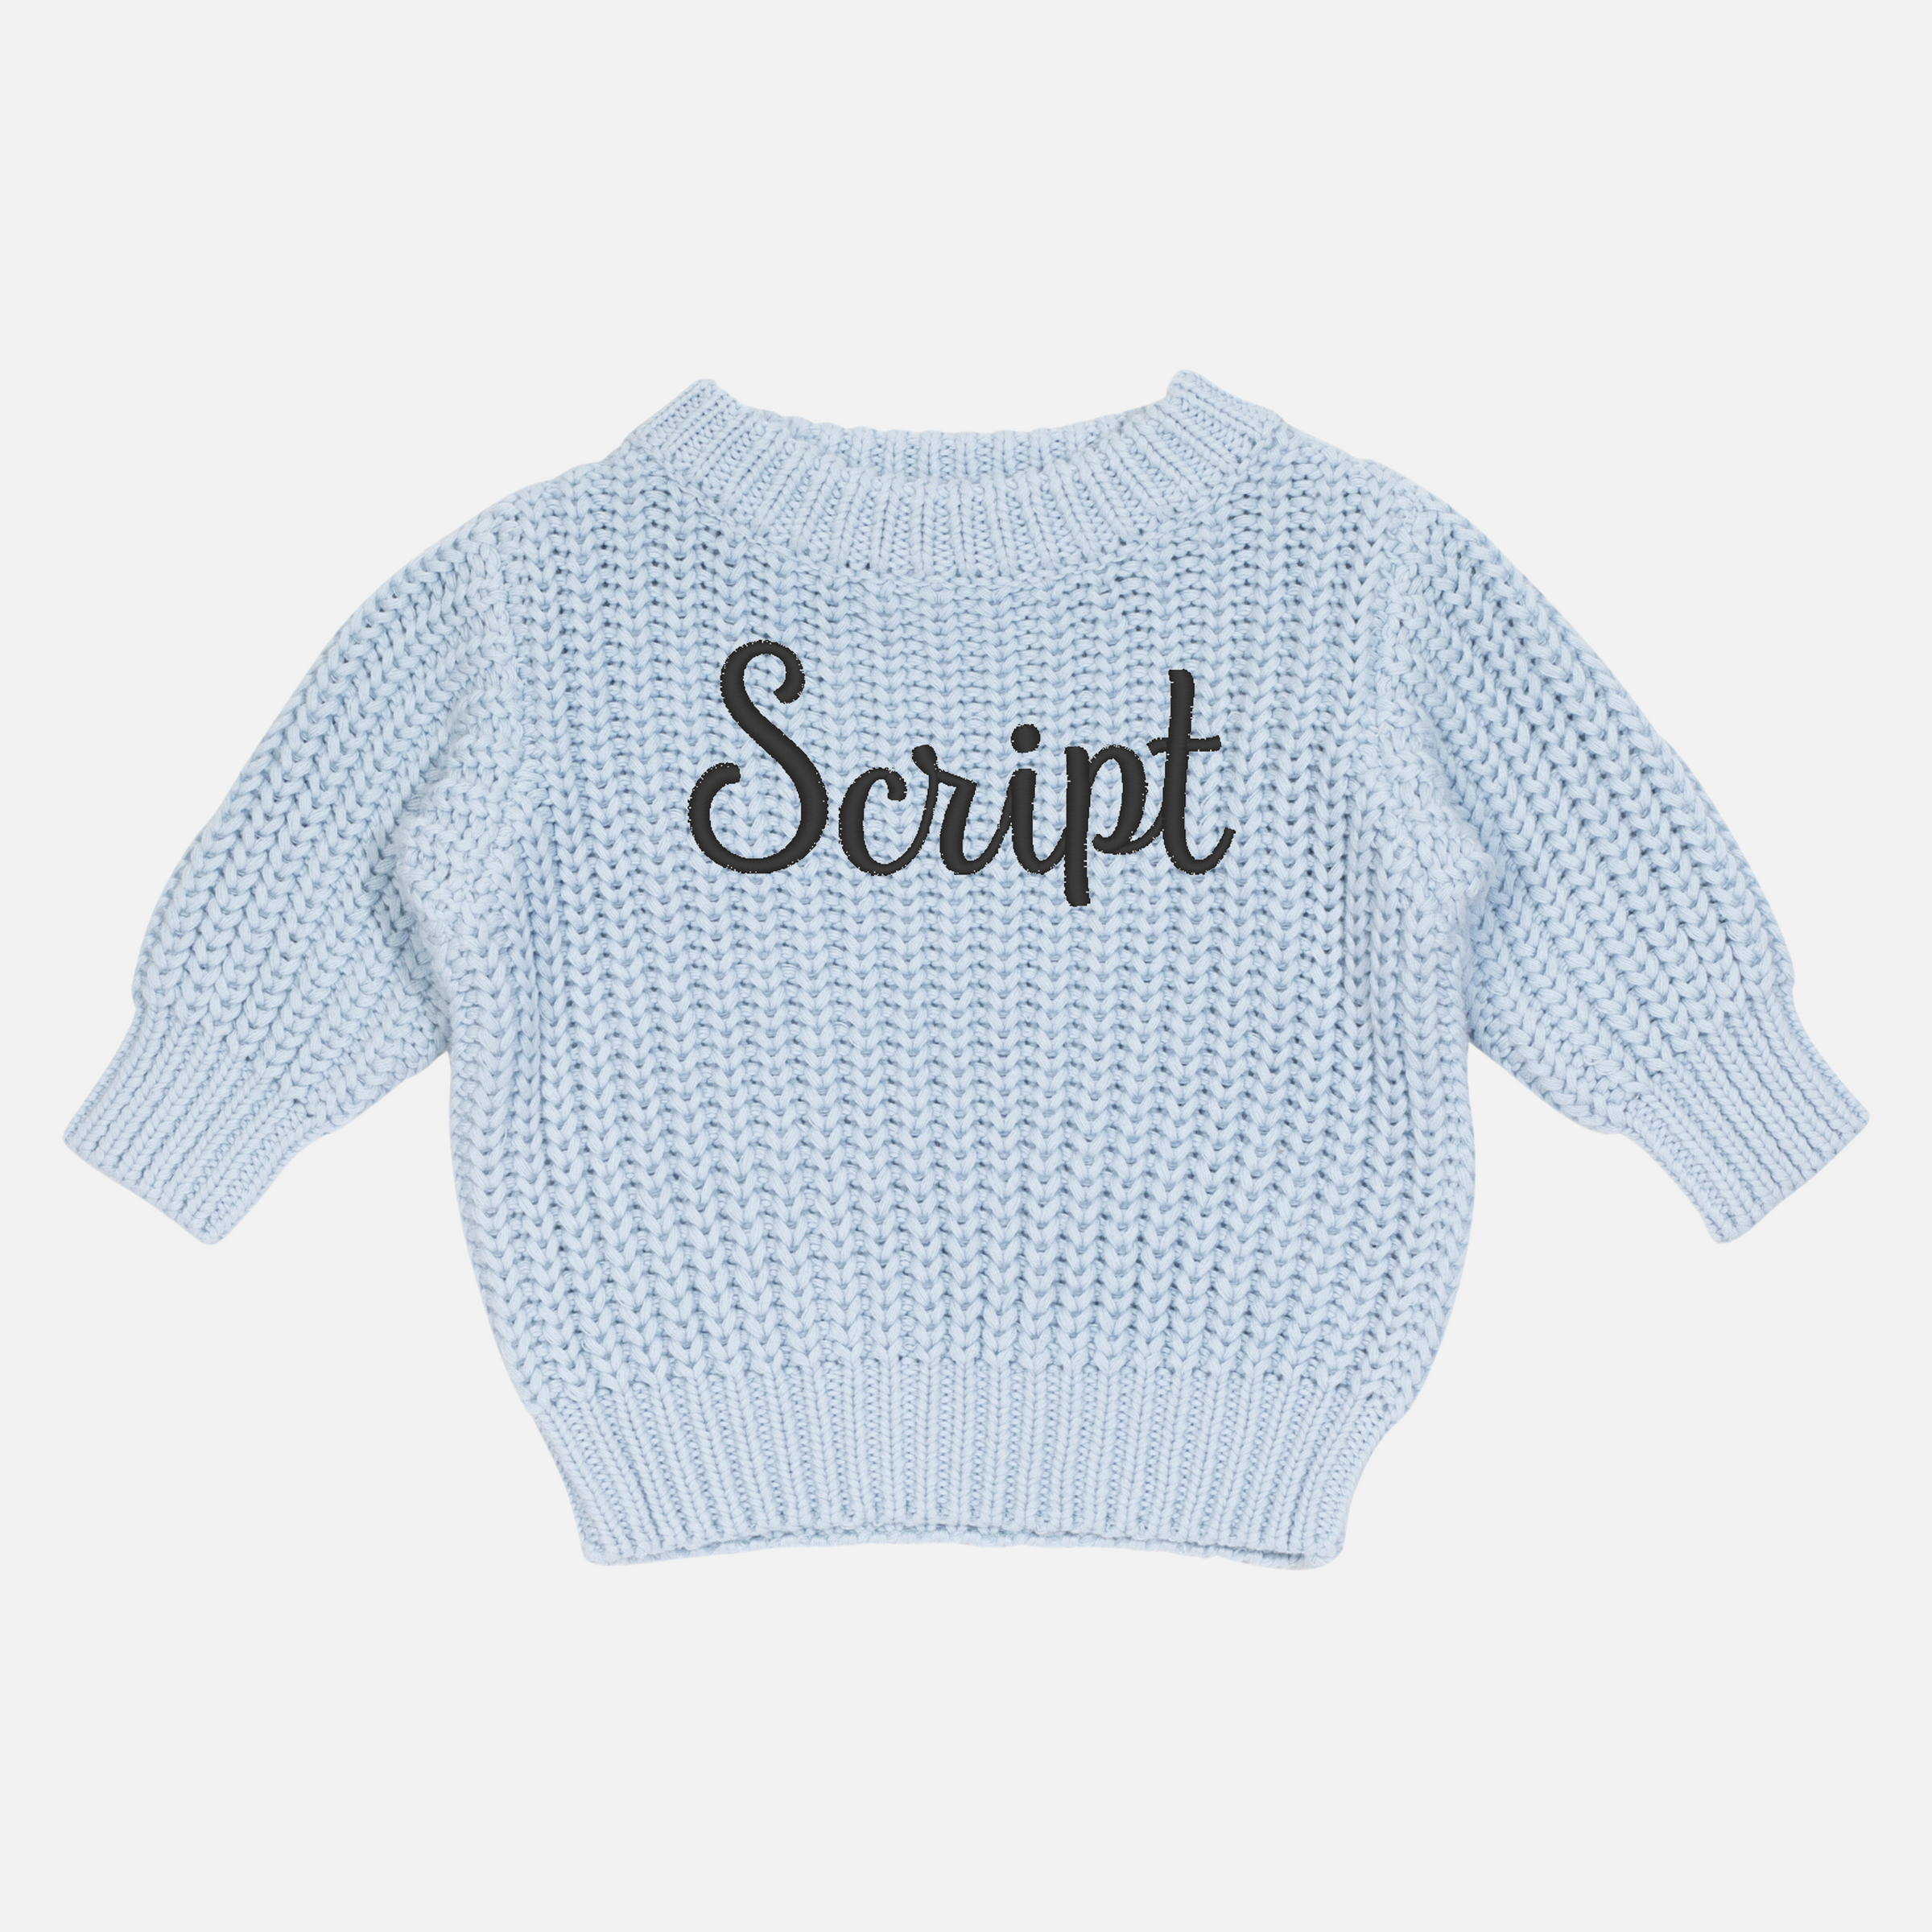 Embroidered Super Chunky Knit - Powder Blue